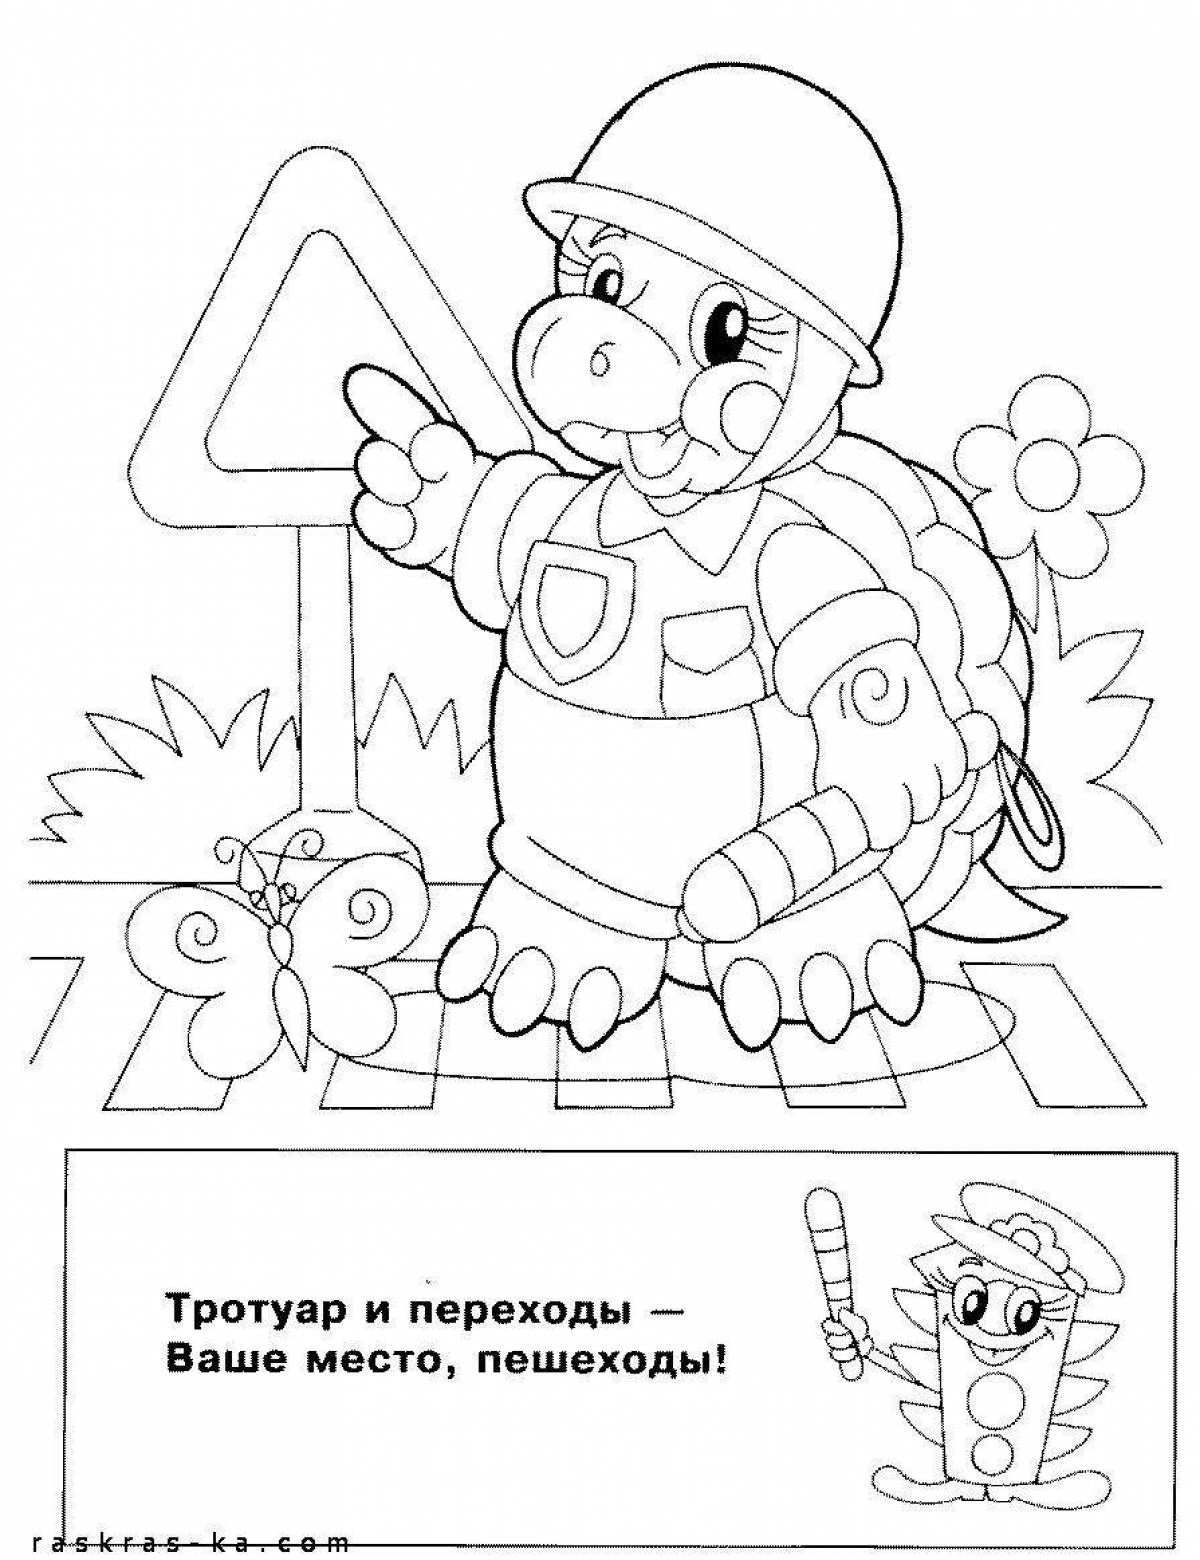 Creative coloring book for kids traffic rules for preschoolers